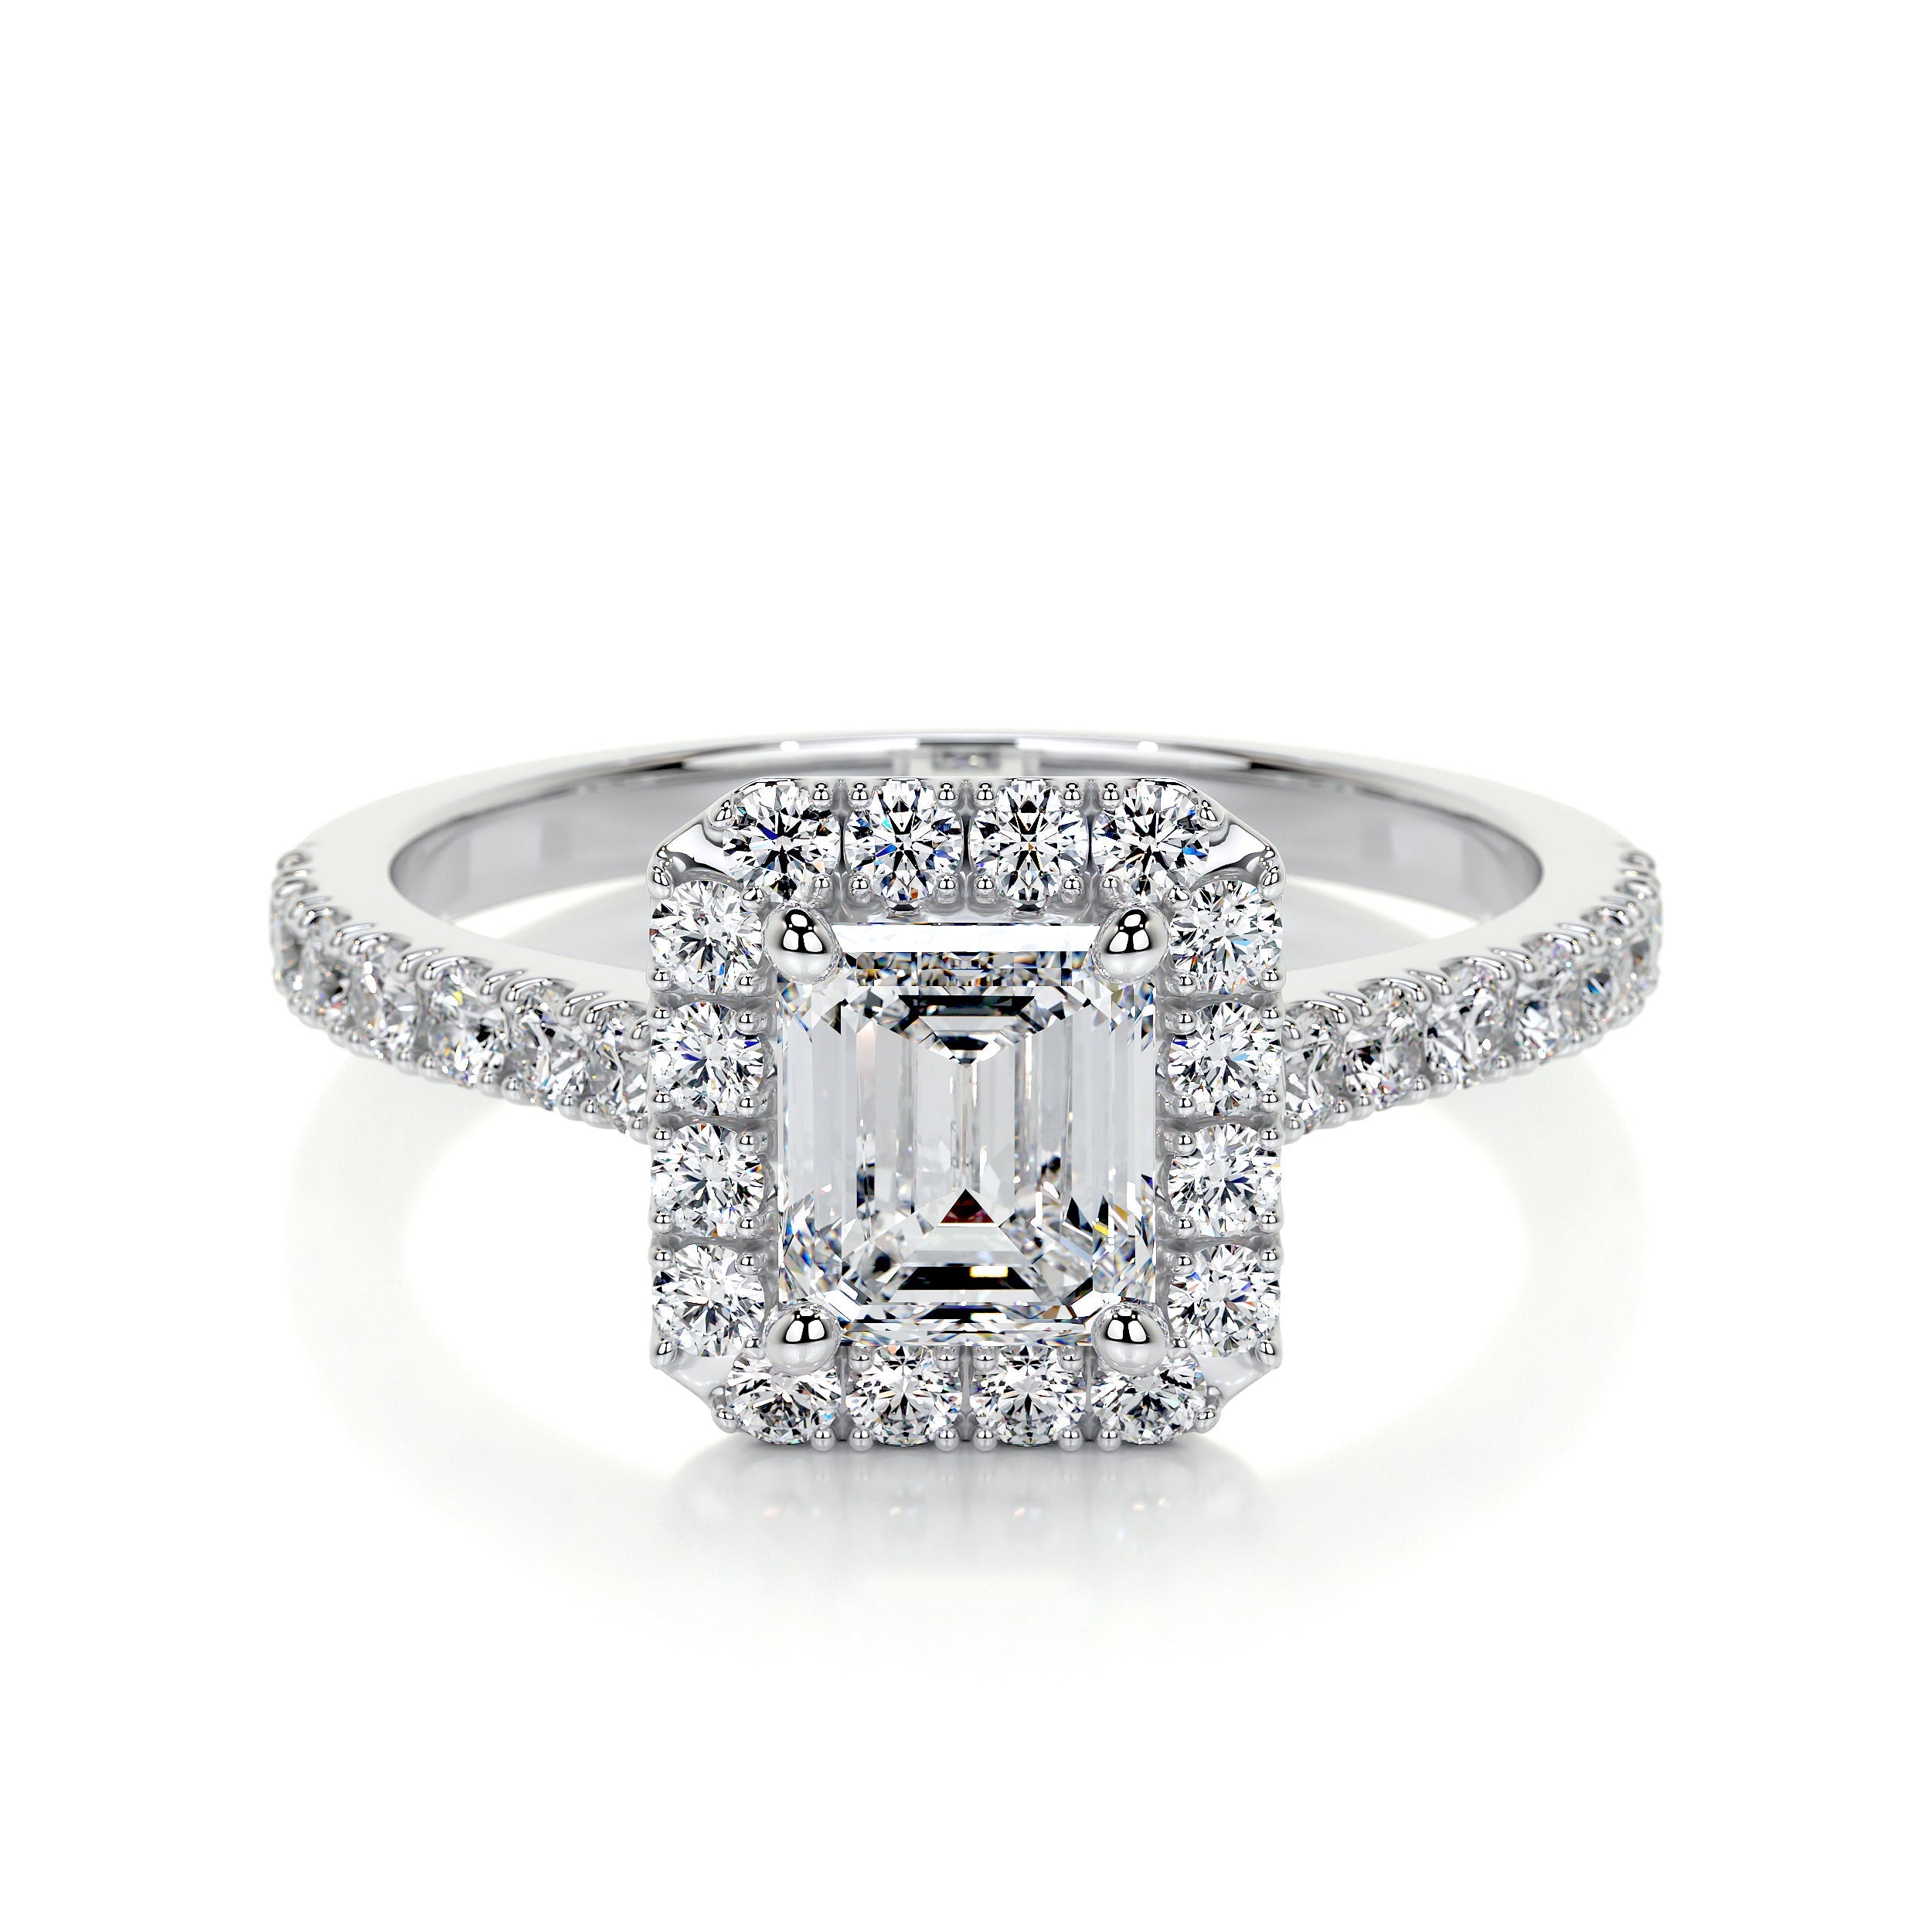 MOISSANITE ENGAGEMENT RING: TOP 5 SITES